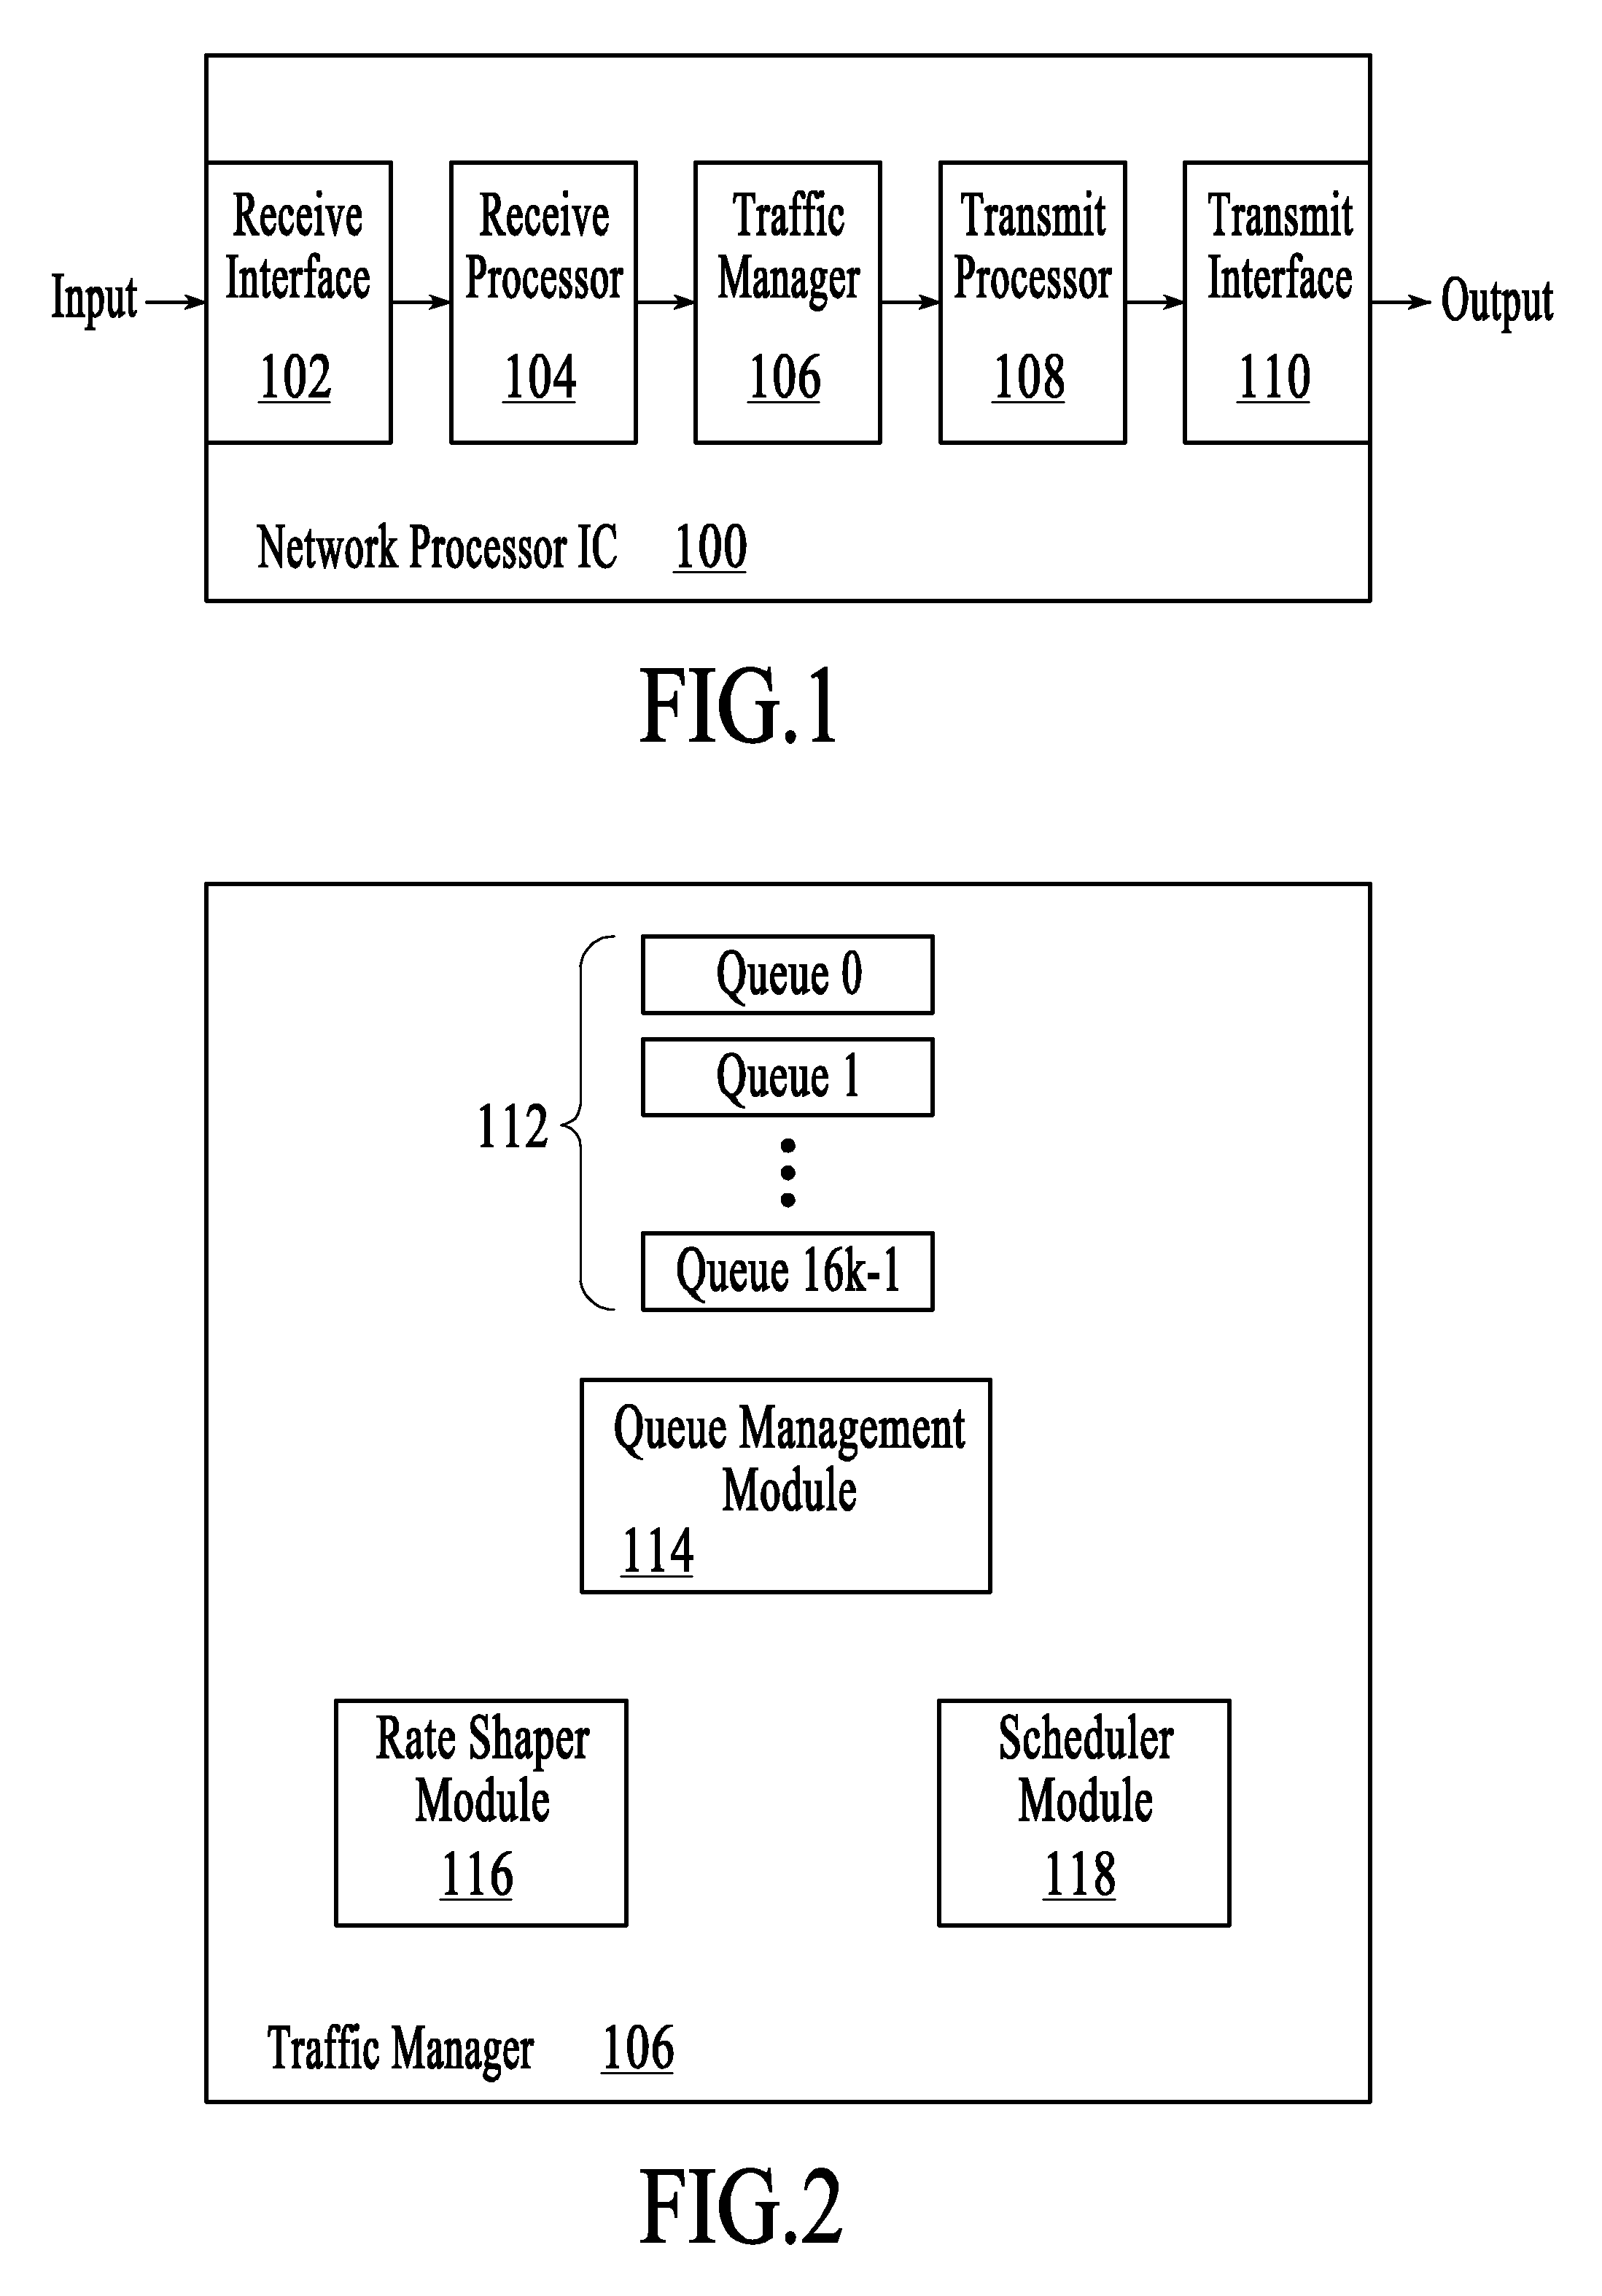 Highly-scalable hardware-based traffic management within a network processor integrated circuit